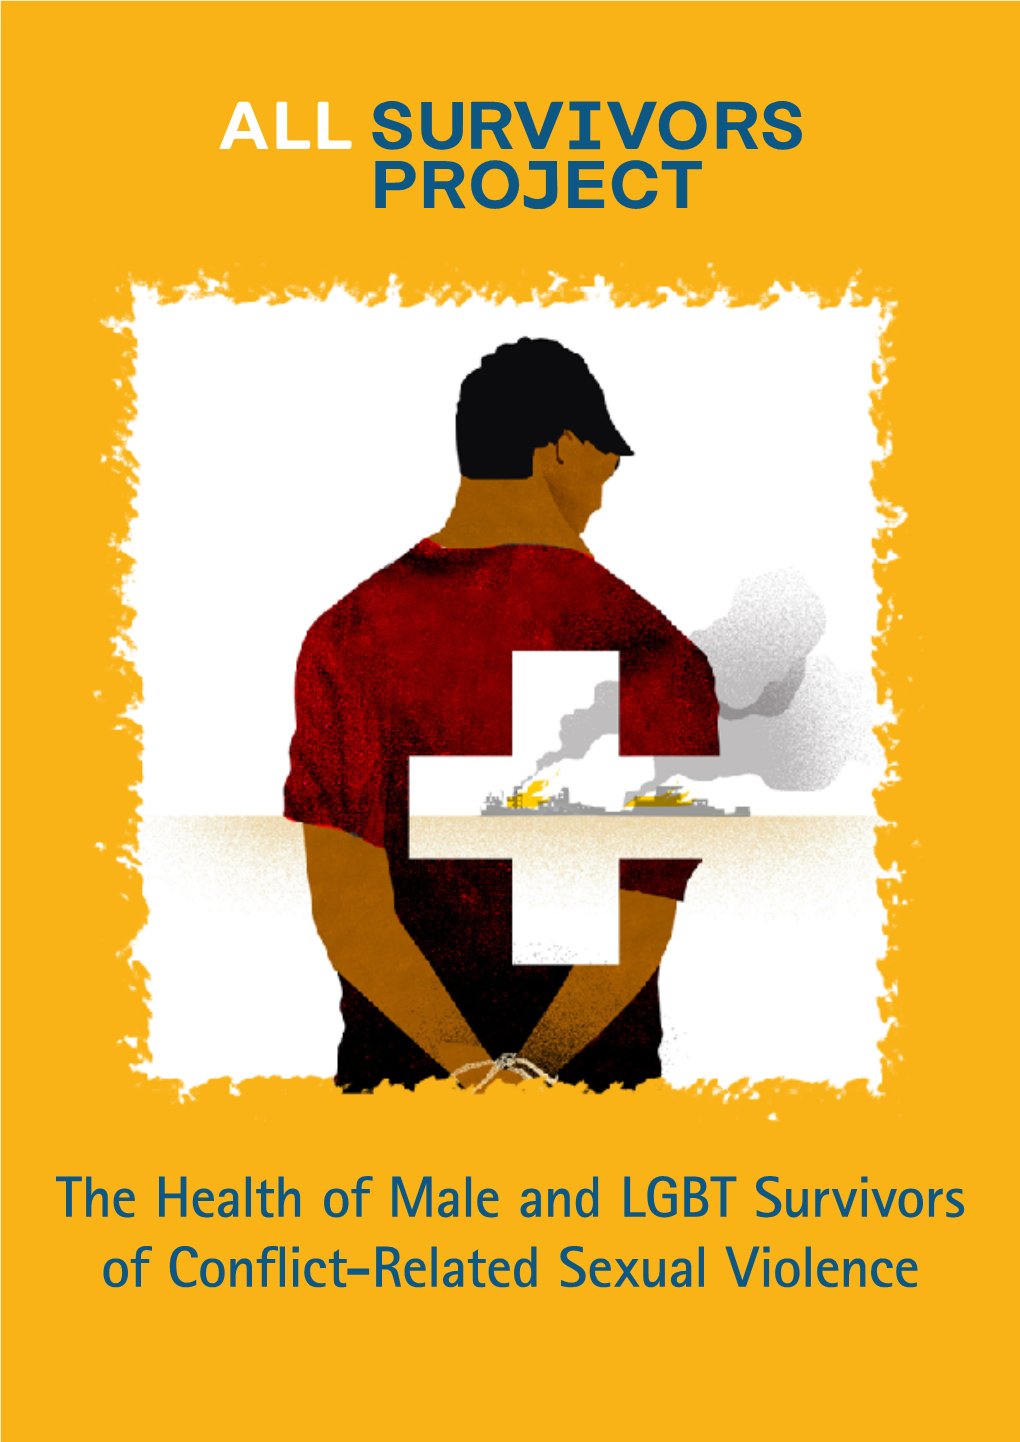 The Health of Male and LGBT Survivors of Conflict-Related Sexual Violence